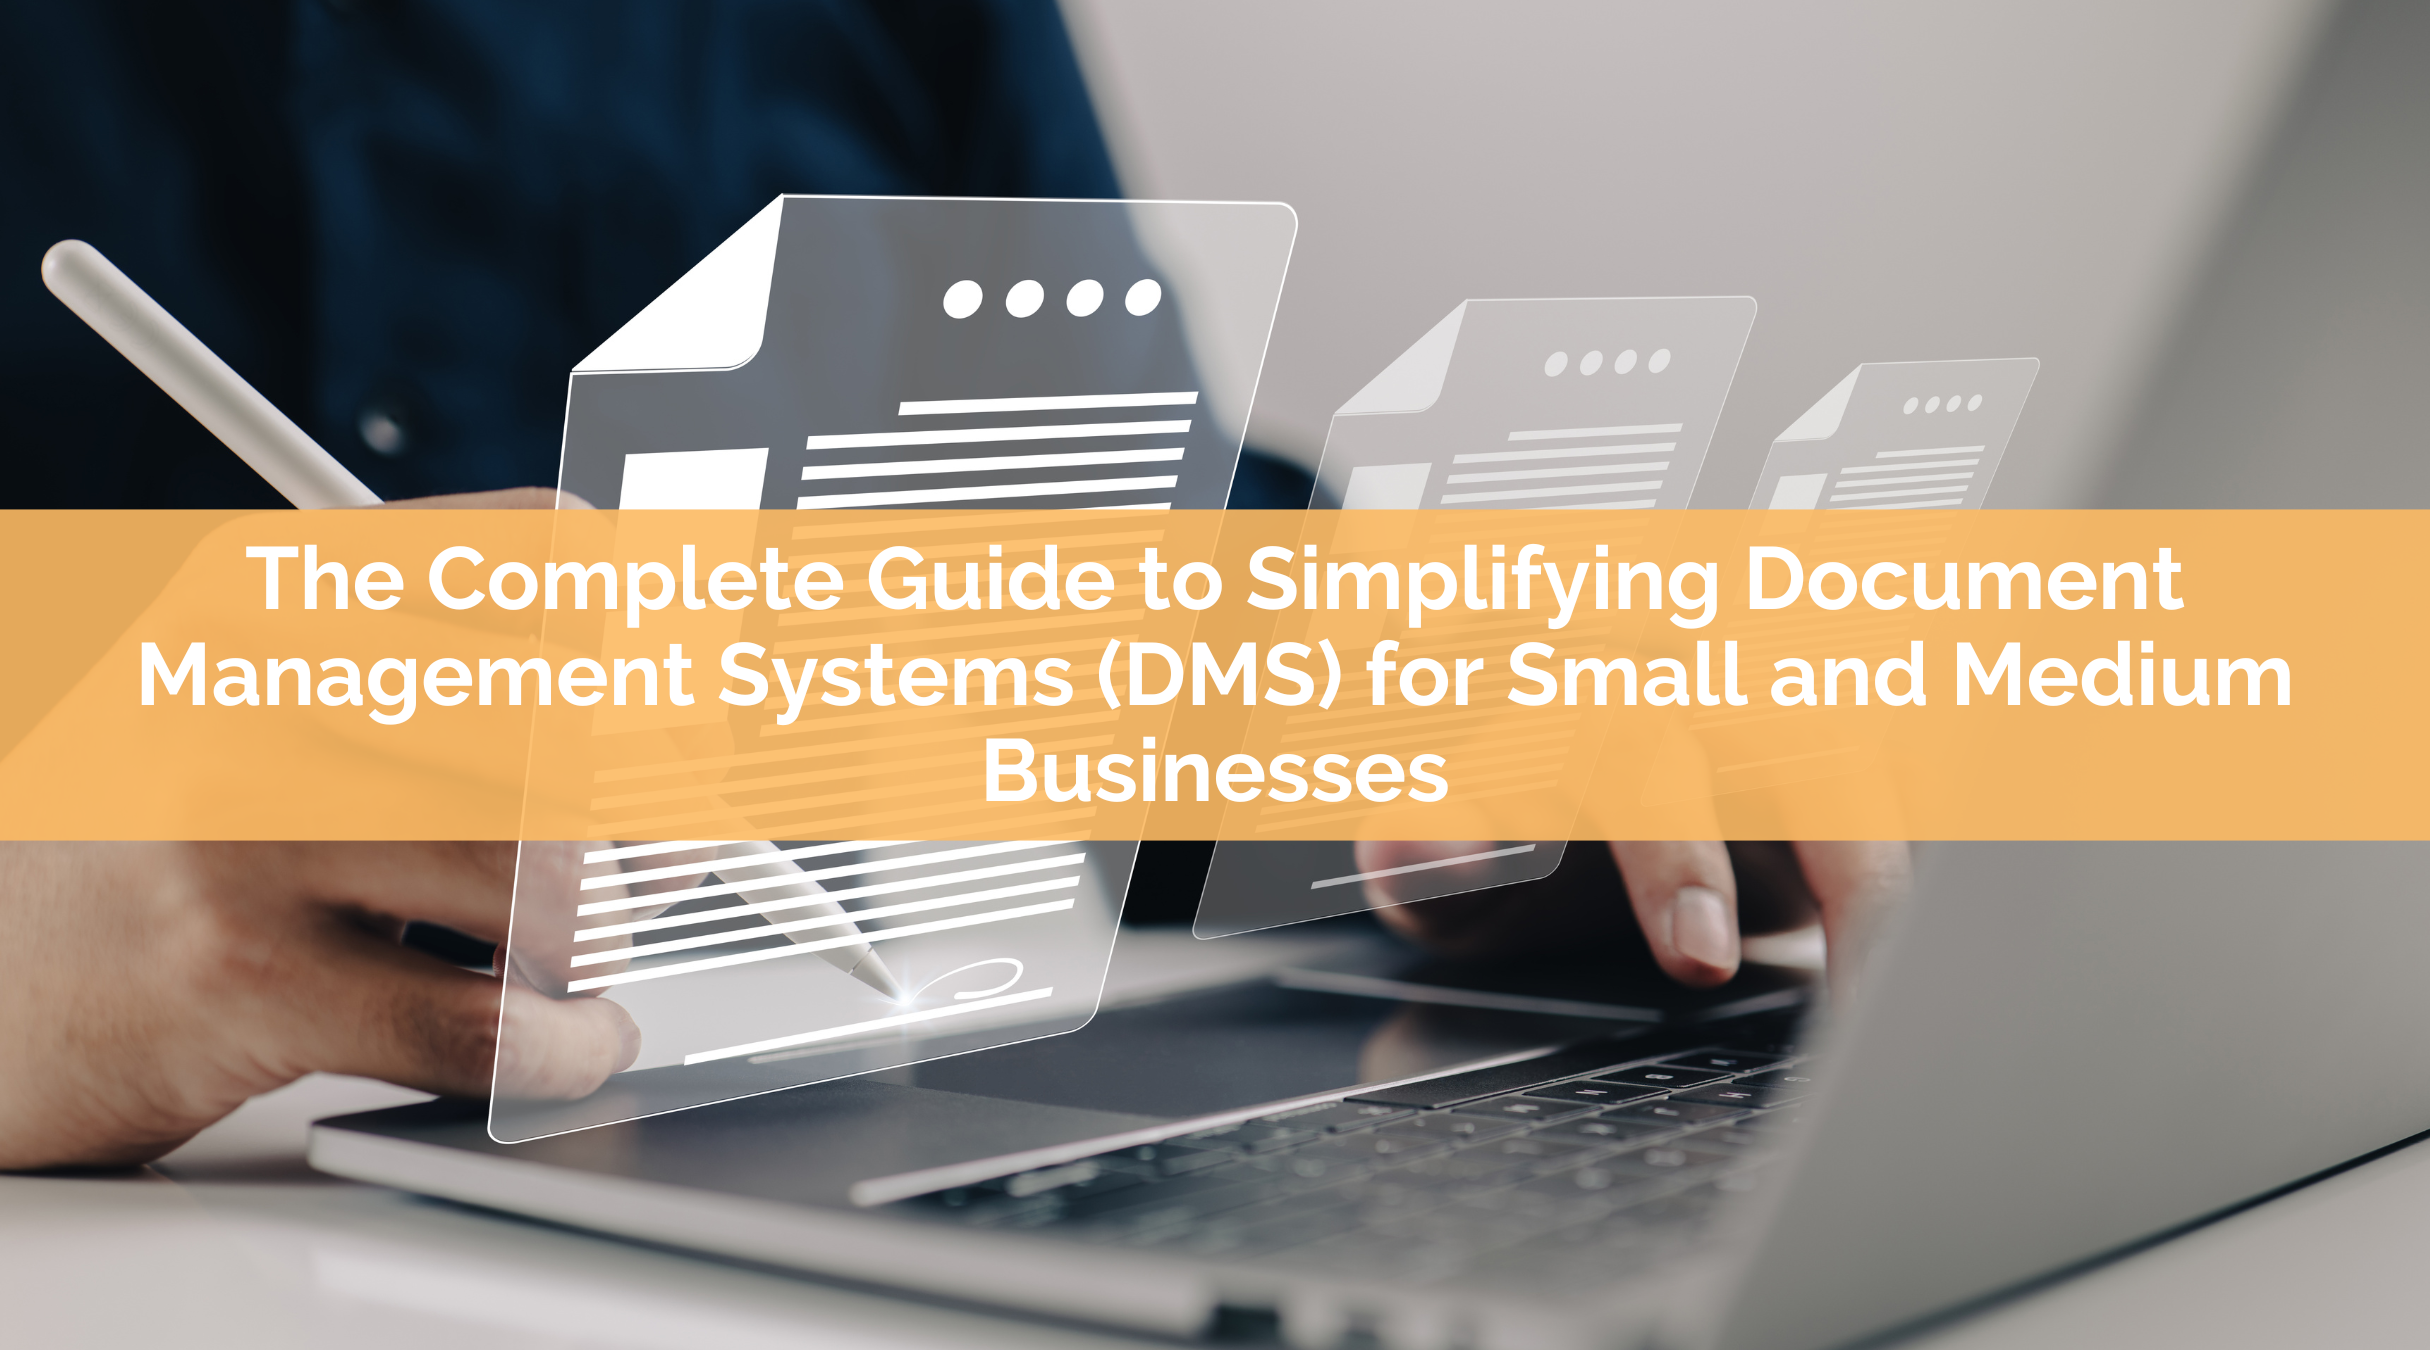 The Complete Guide to Simplifying Document Management Systems (DMS) for Small and Medium Businesses